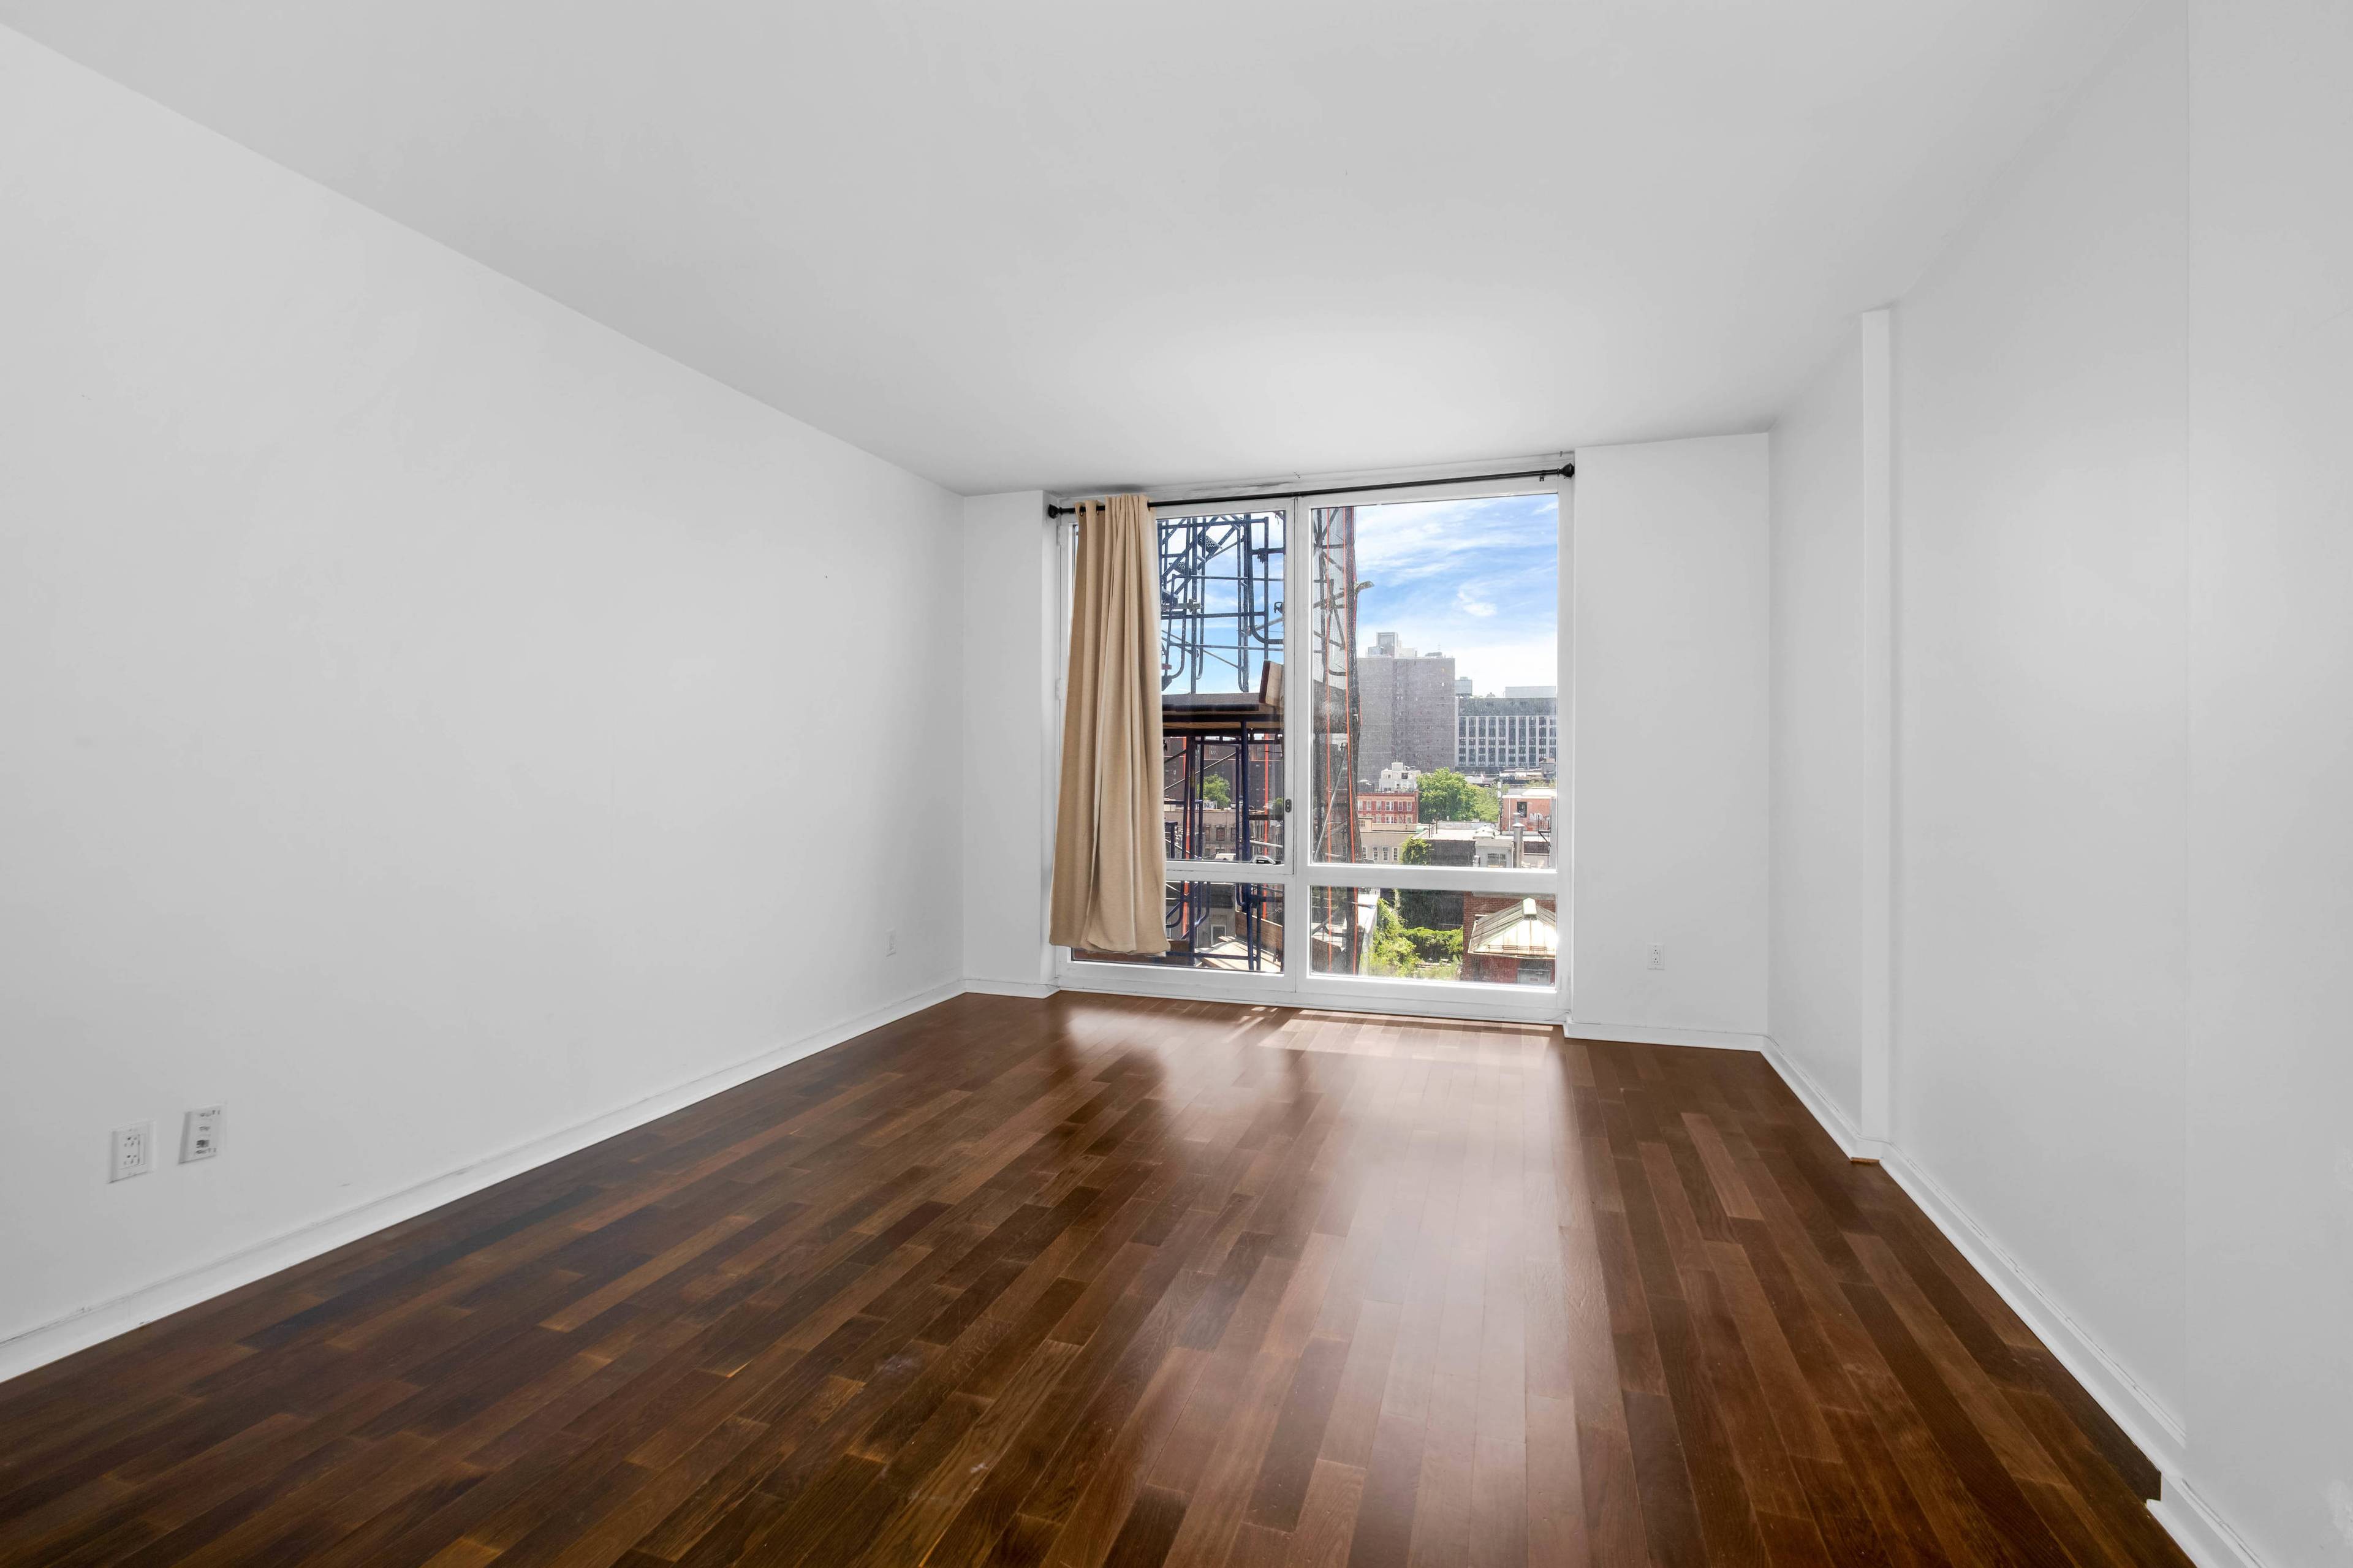 340 East 23rd Street Condo Rent out from day one 24hr doorman Beautiful landscaped and furnished roofdeck Surround yourself with great views, and exceptional interiors in this designer oversized studio, ...